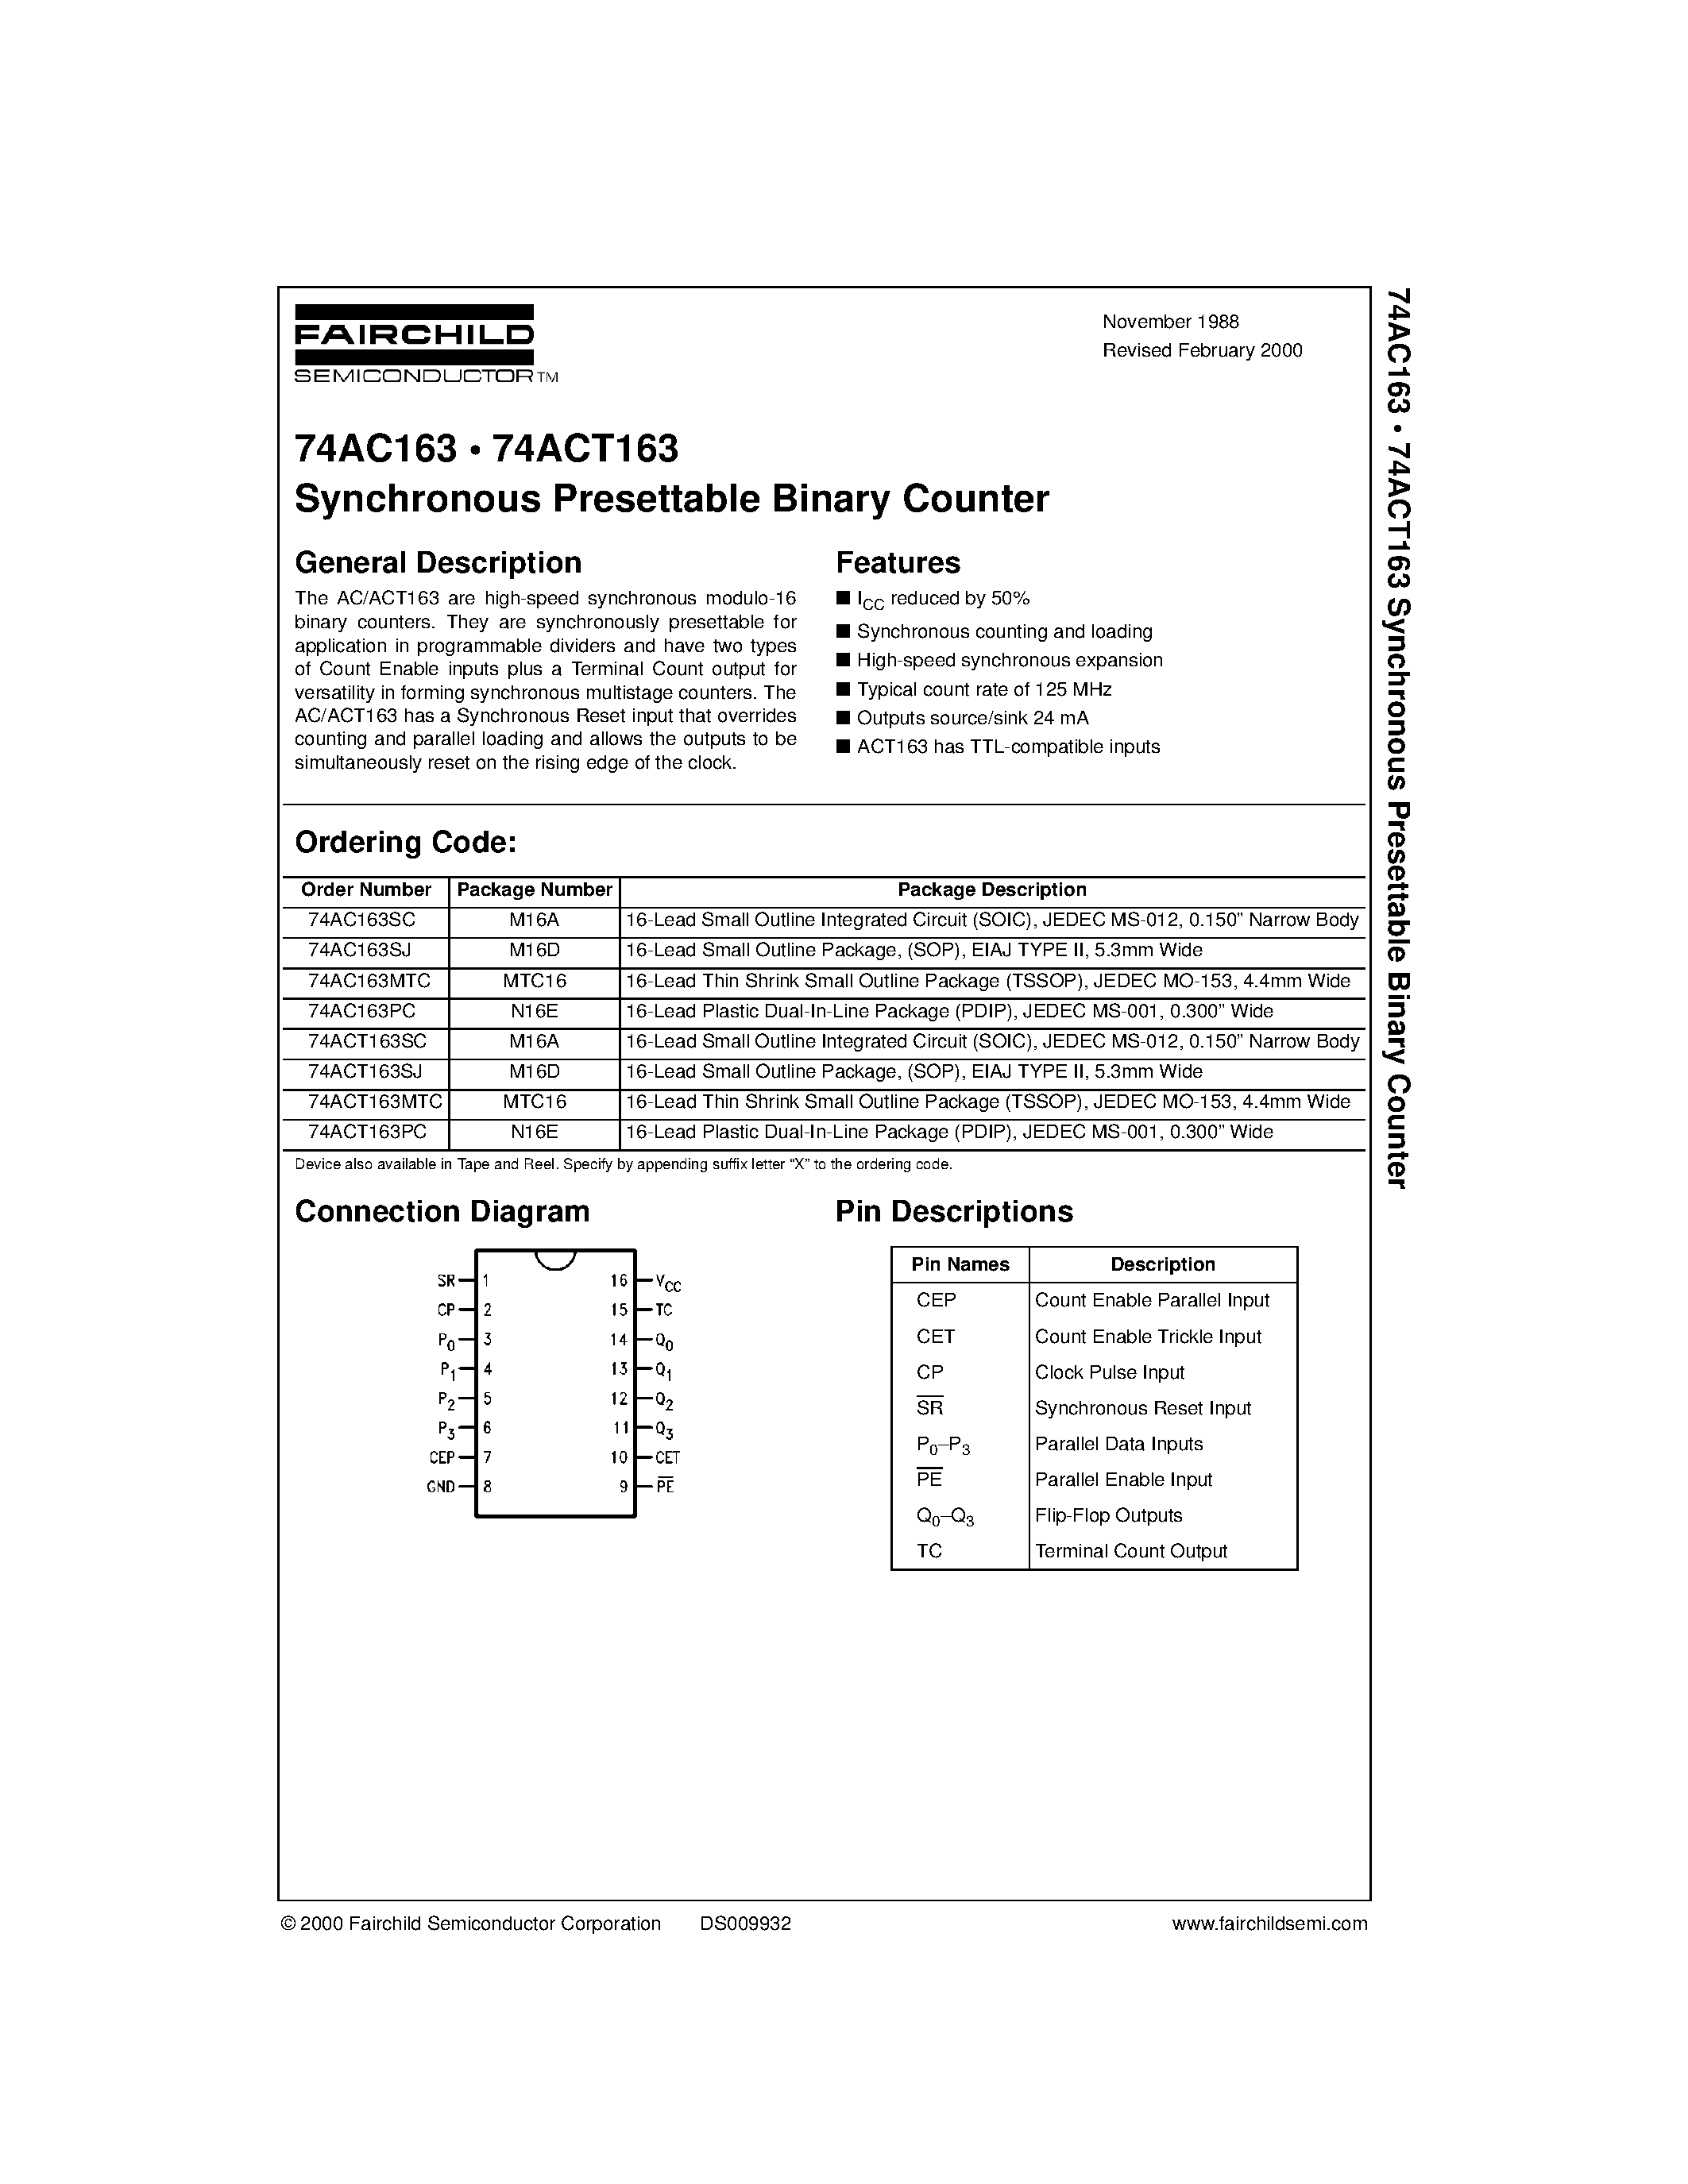 Datasheet 74AC163PC - Synchronous Presettable Binary Counter page 1